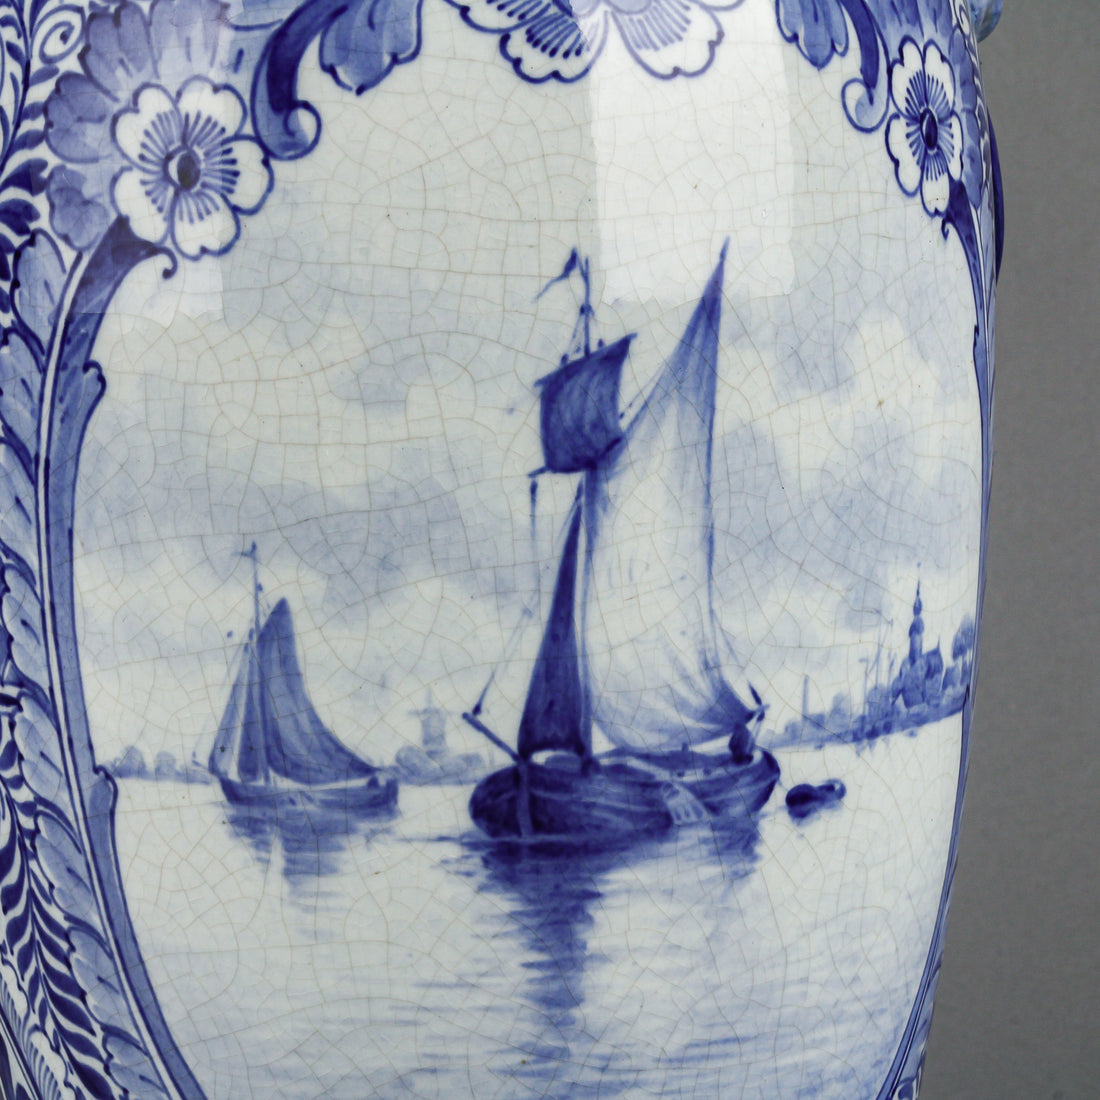 ROYAL DELFT Hand-Painted Windmill/Boat Vase